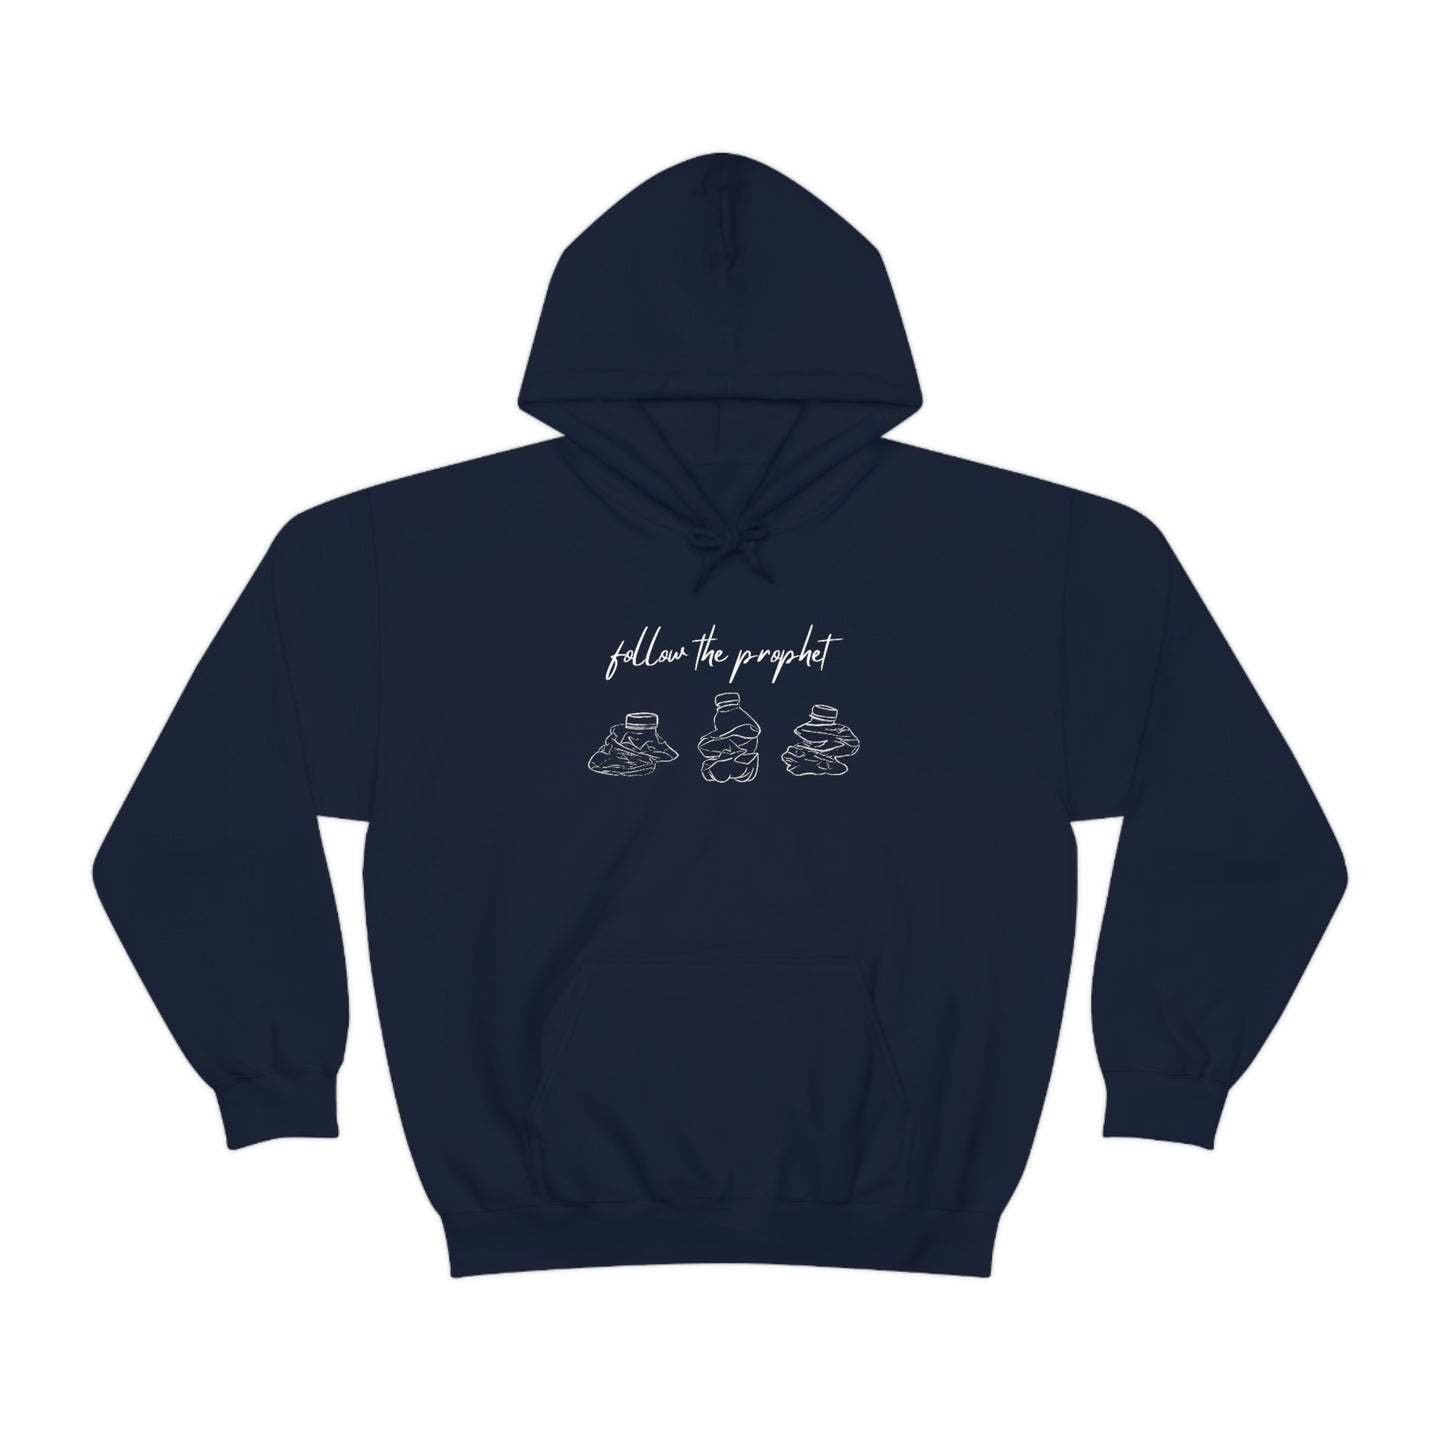 Unisex Heavy Blend™ Hooded Sweatshirt, Follow the Prophet, Recycle Crushed Water Bottle, General Conference 2023